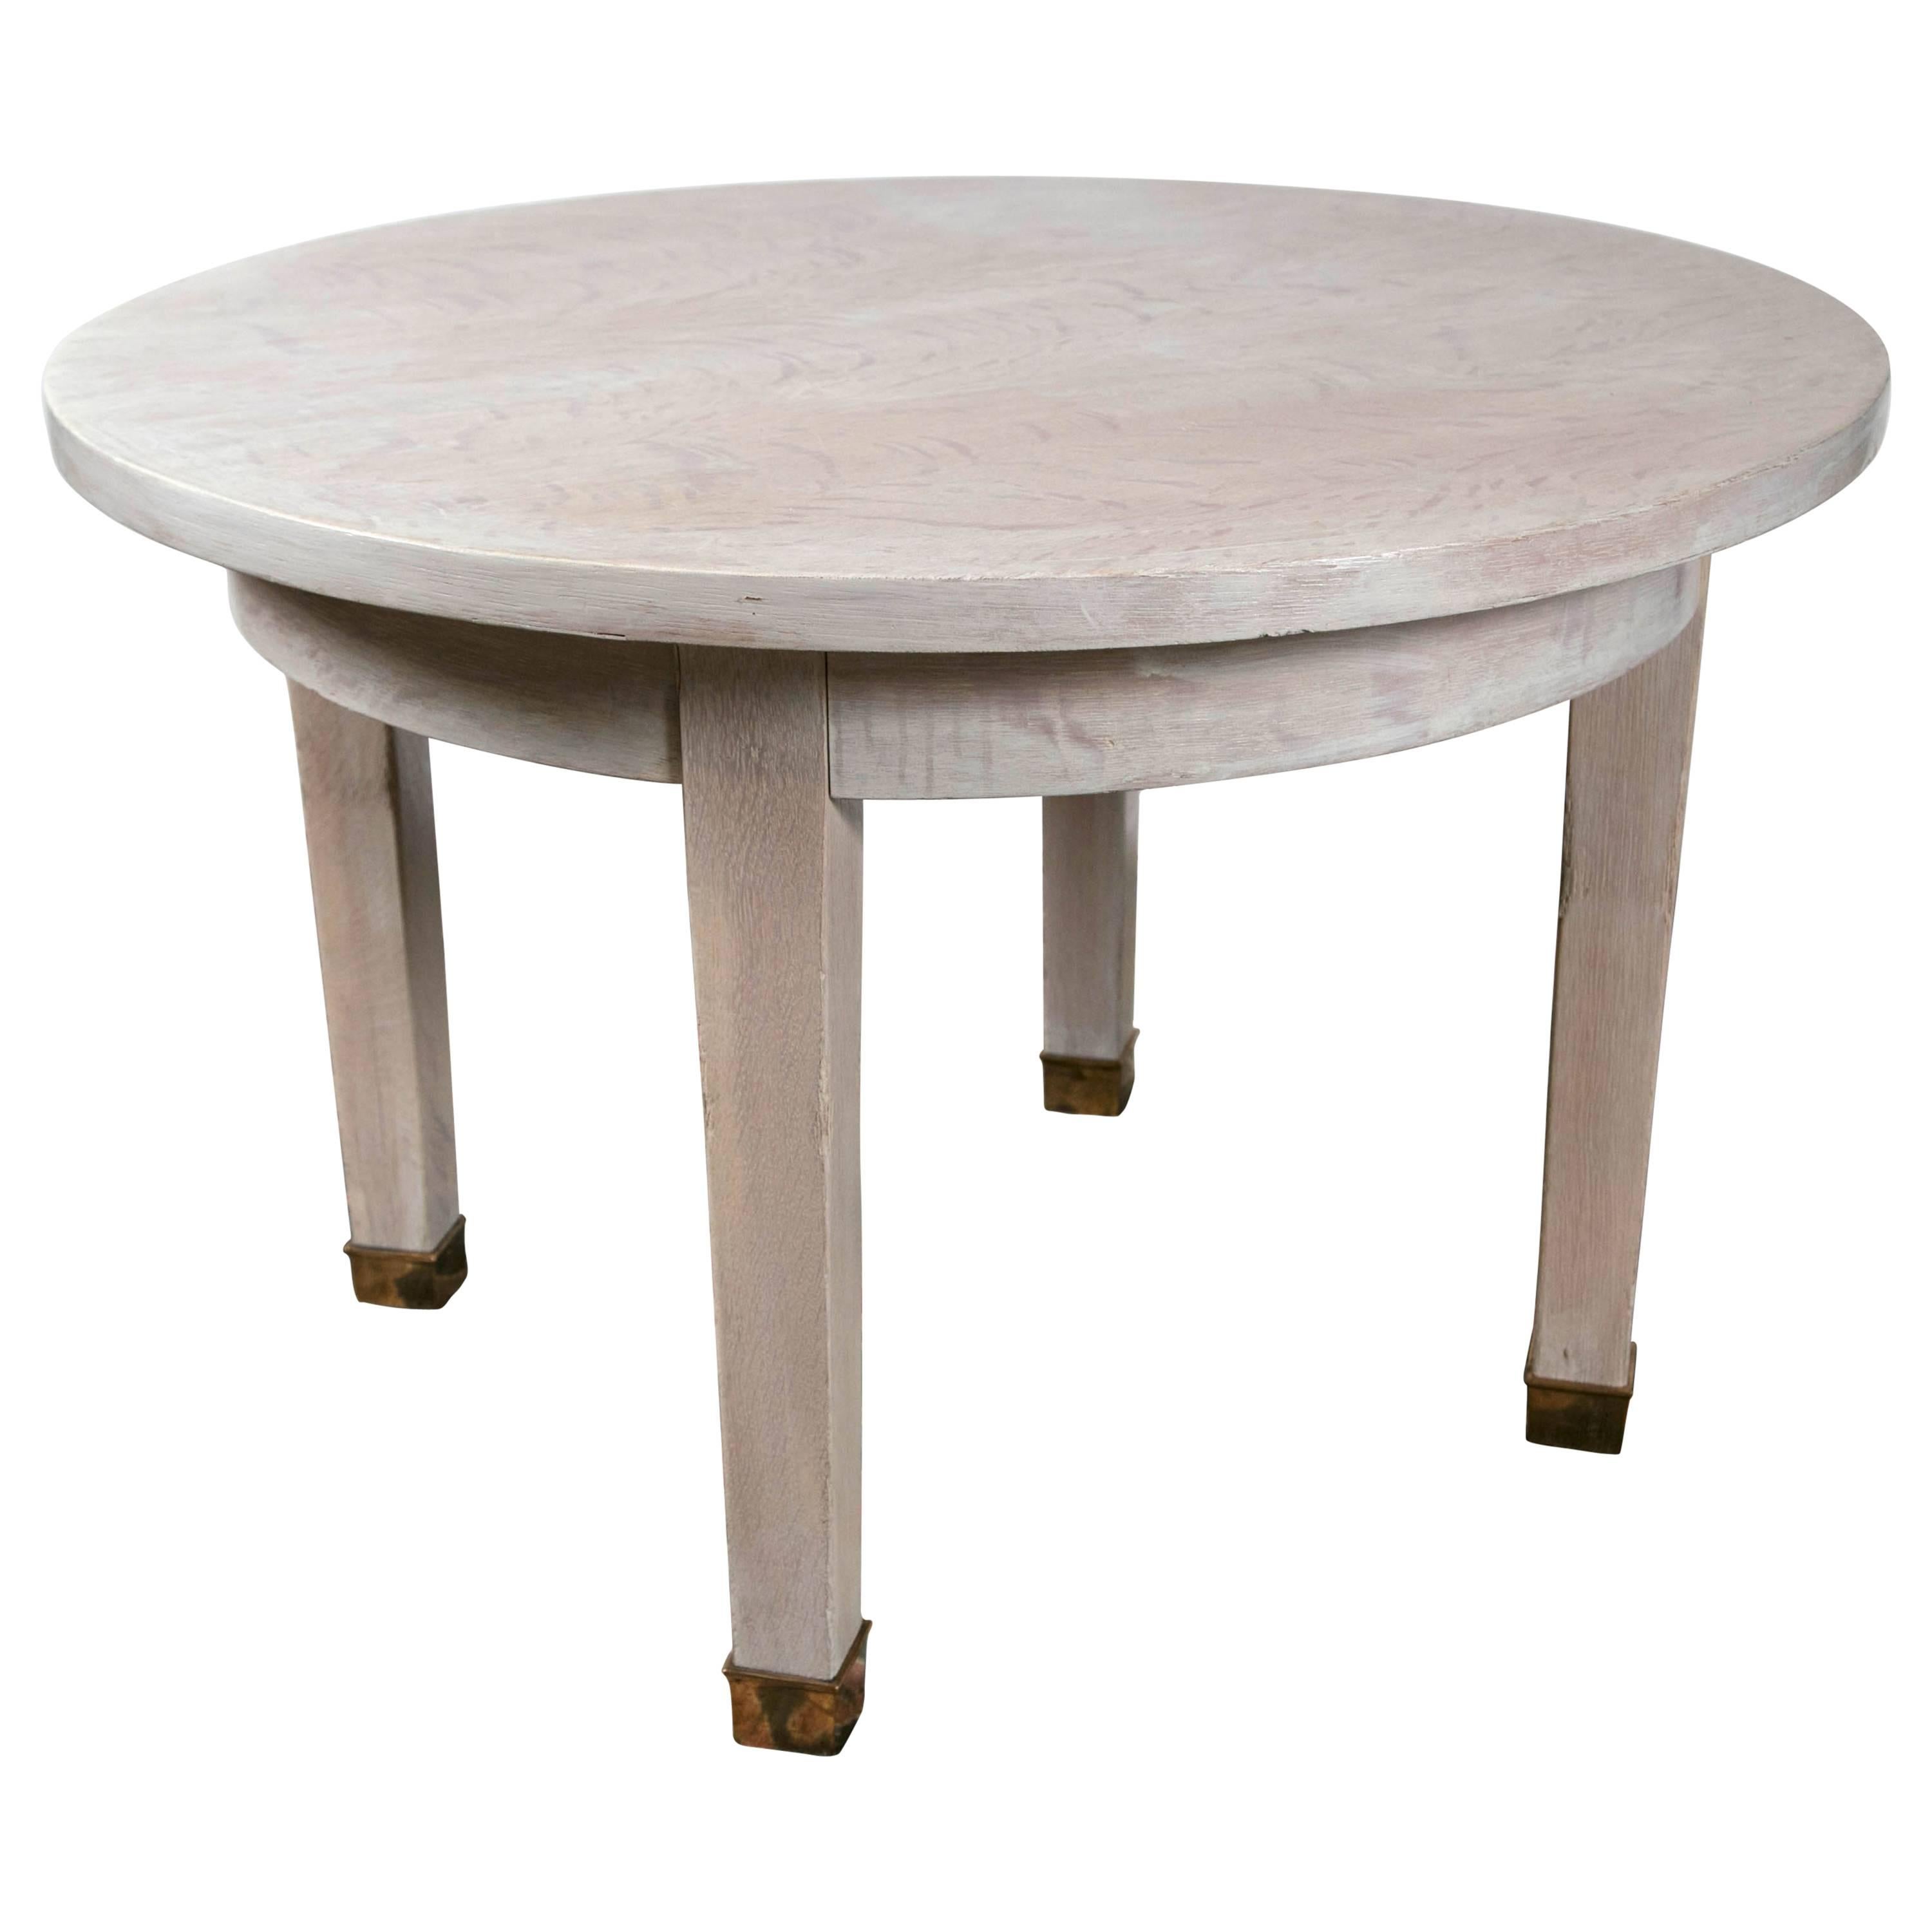 White Painted Table